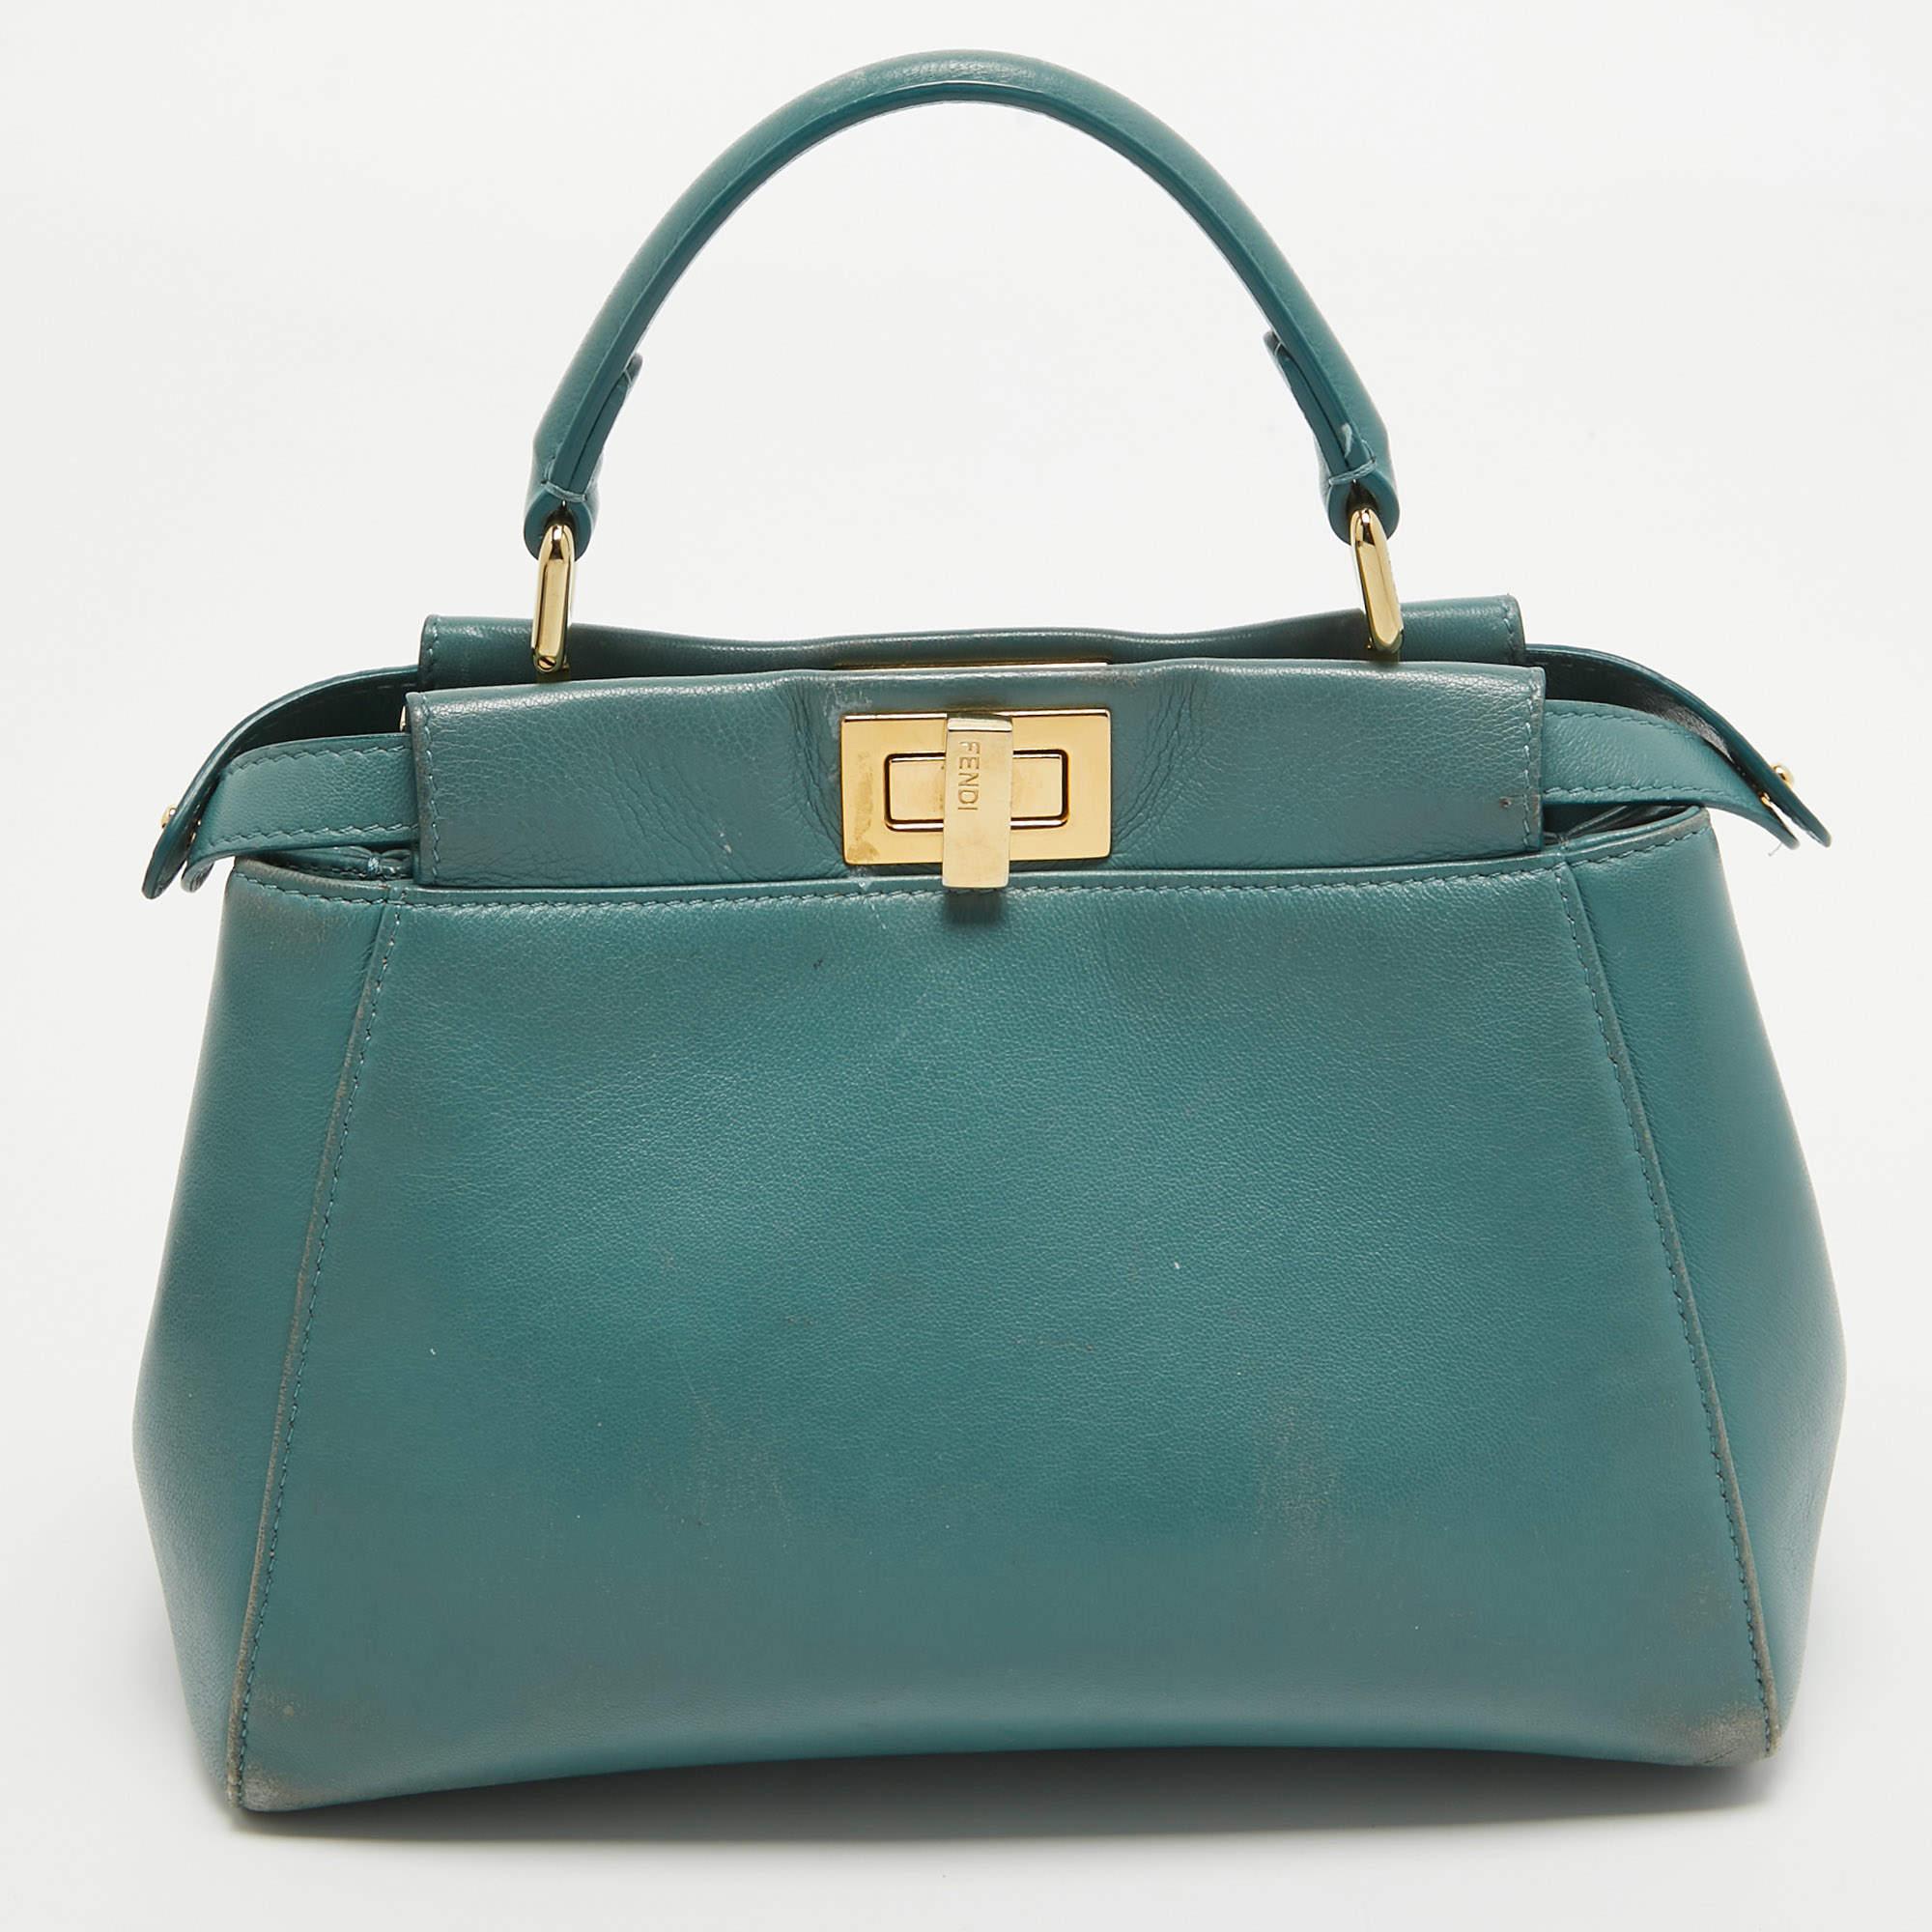 Designed by Venturini Fendi, the Peekaboo was first debuted in 2008. The unique construction and representation of this bag enable it to keep up with fashion's ever-changing tide. Constructed from leather, it is complemented with gold-tone hardware,